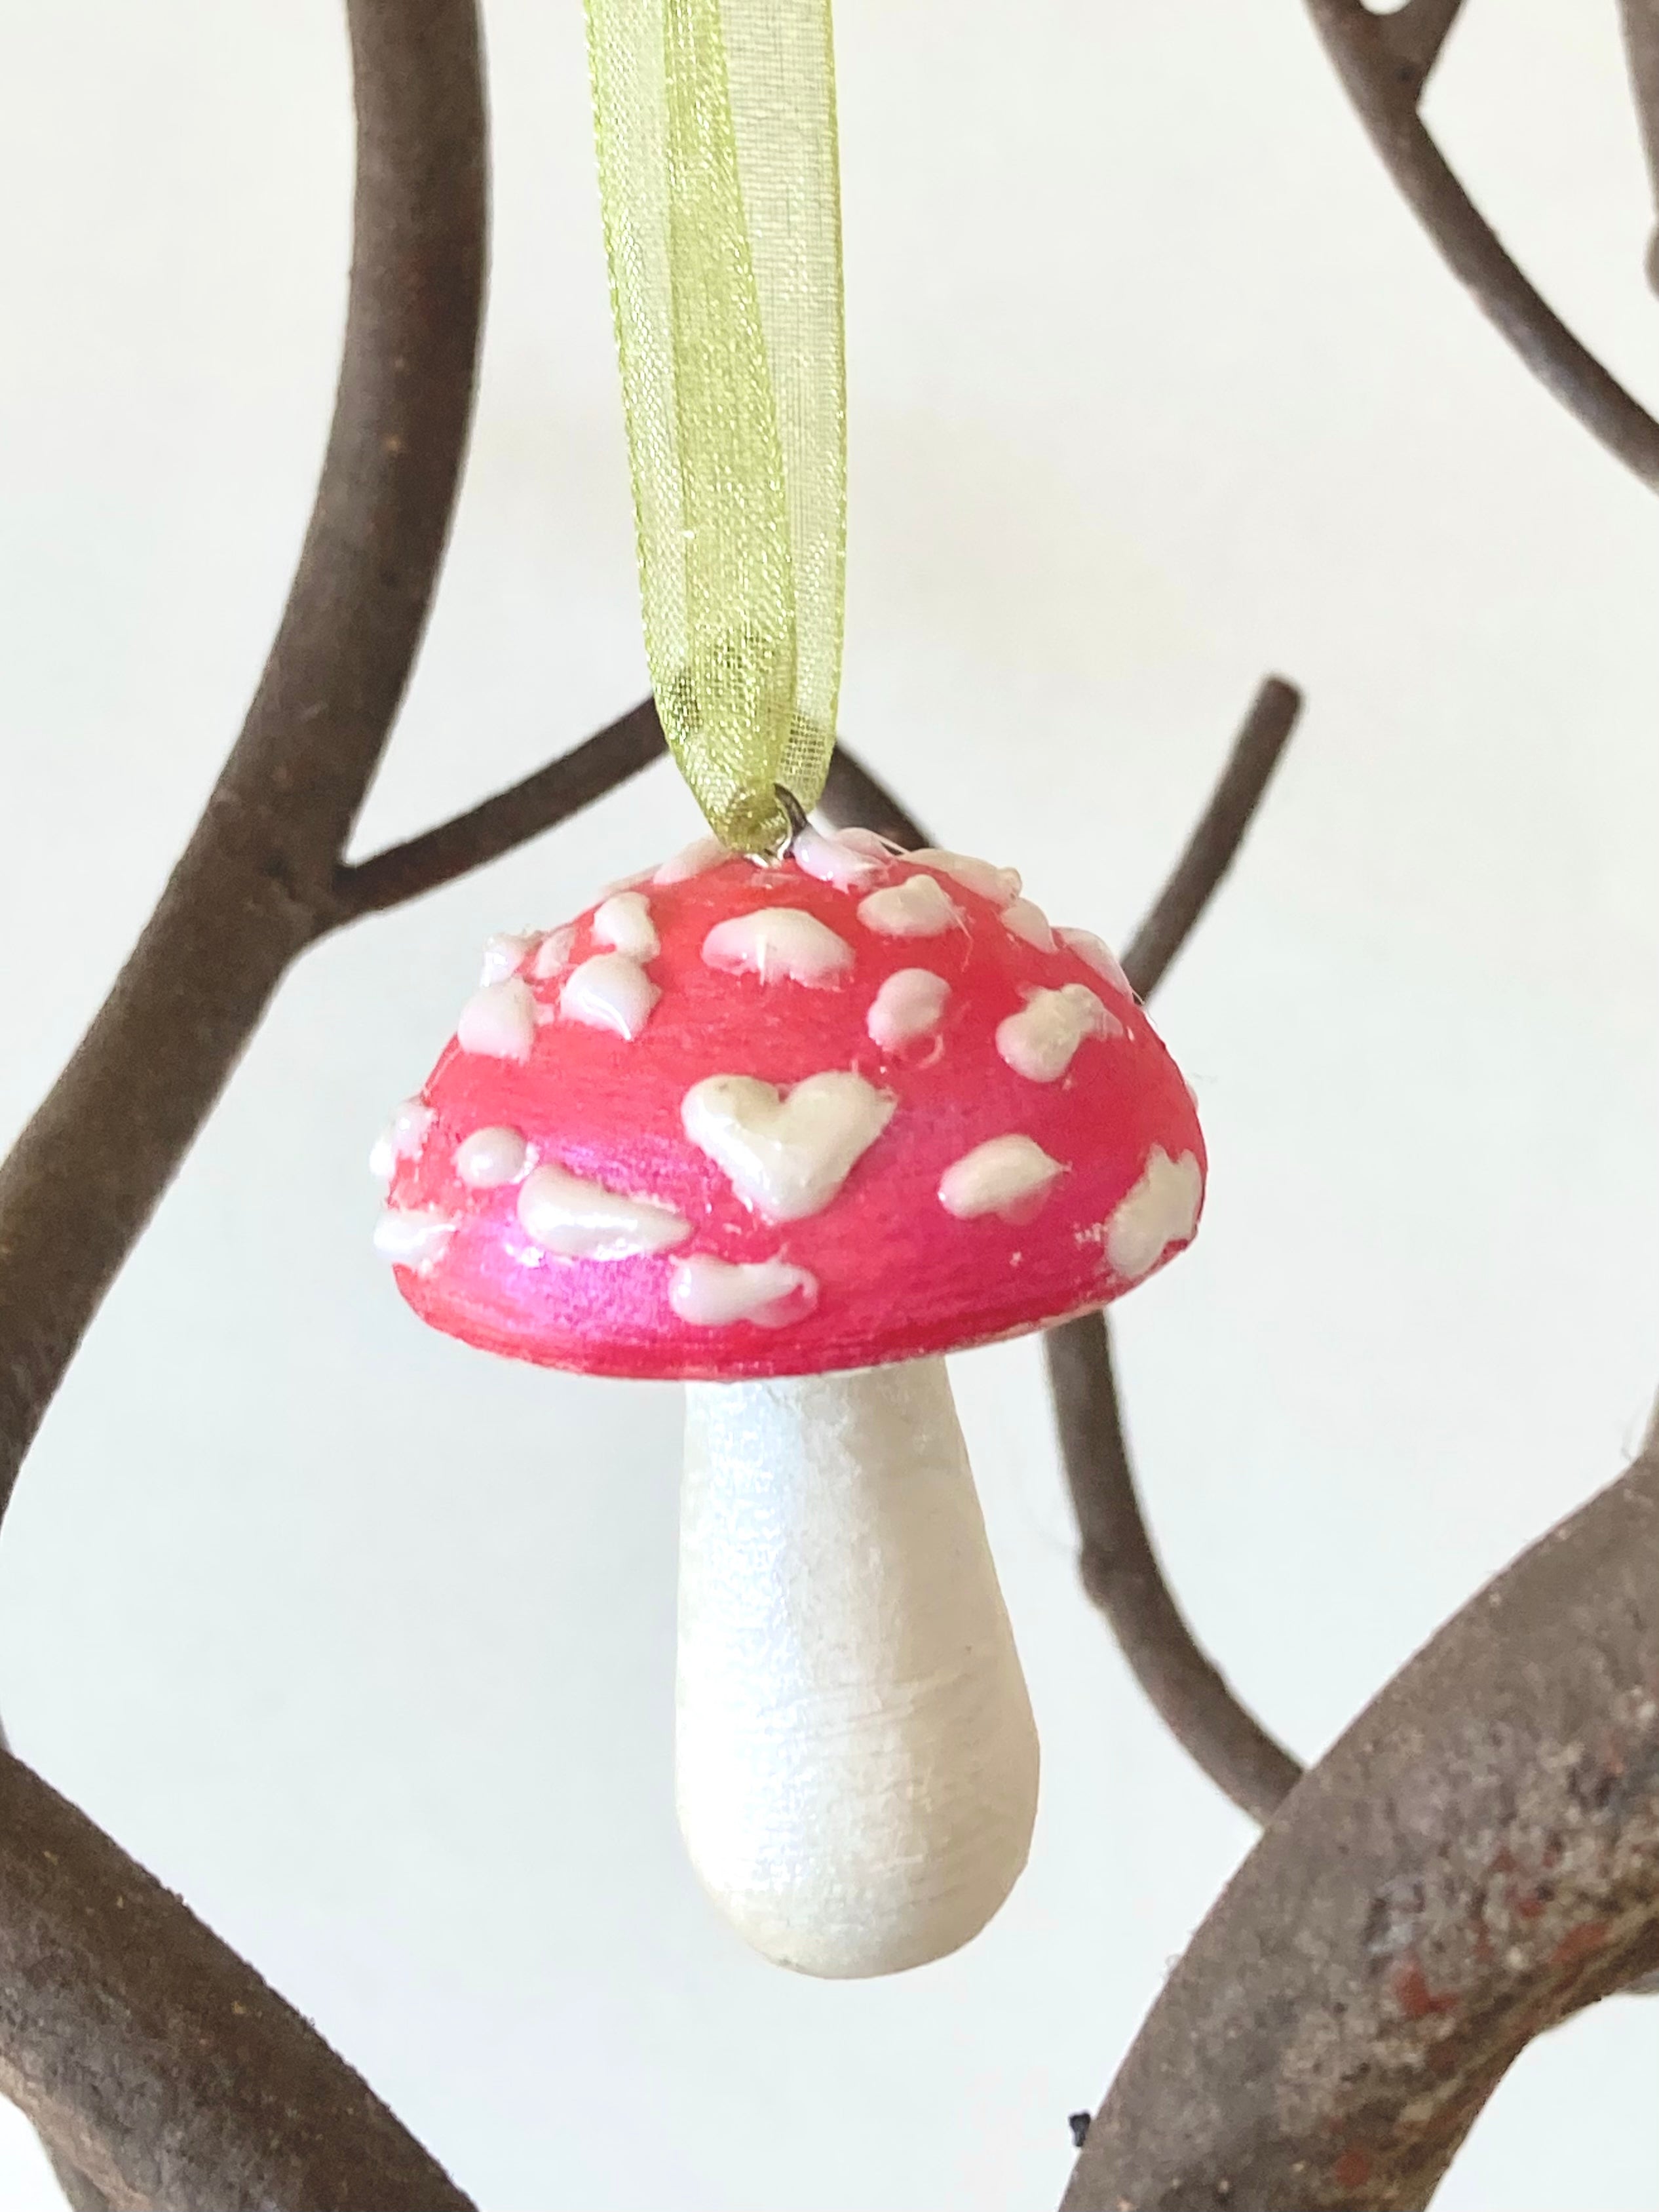 Mushroom Ornament | Hand Painted Iridescent Forest Amanita Toadstool Ornament | Christmas Tree Decoration | Unique Holiday Gift Tags